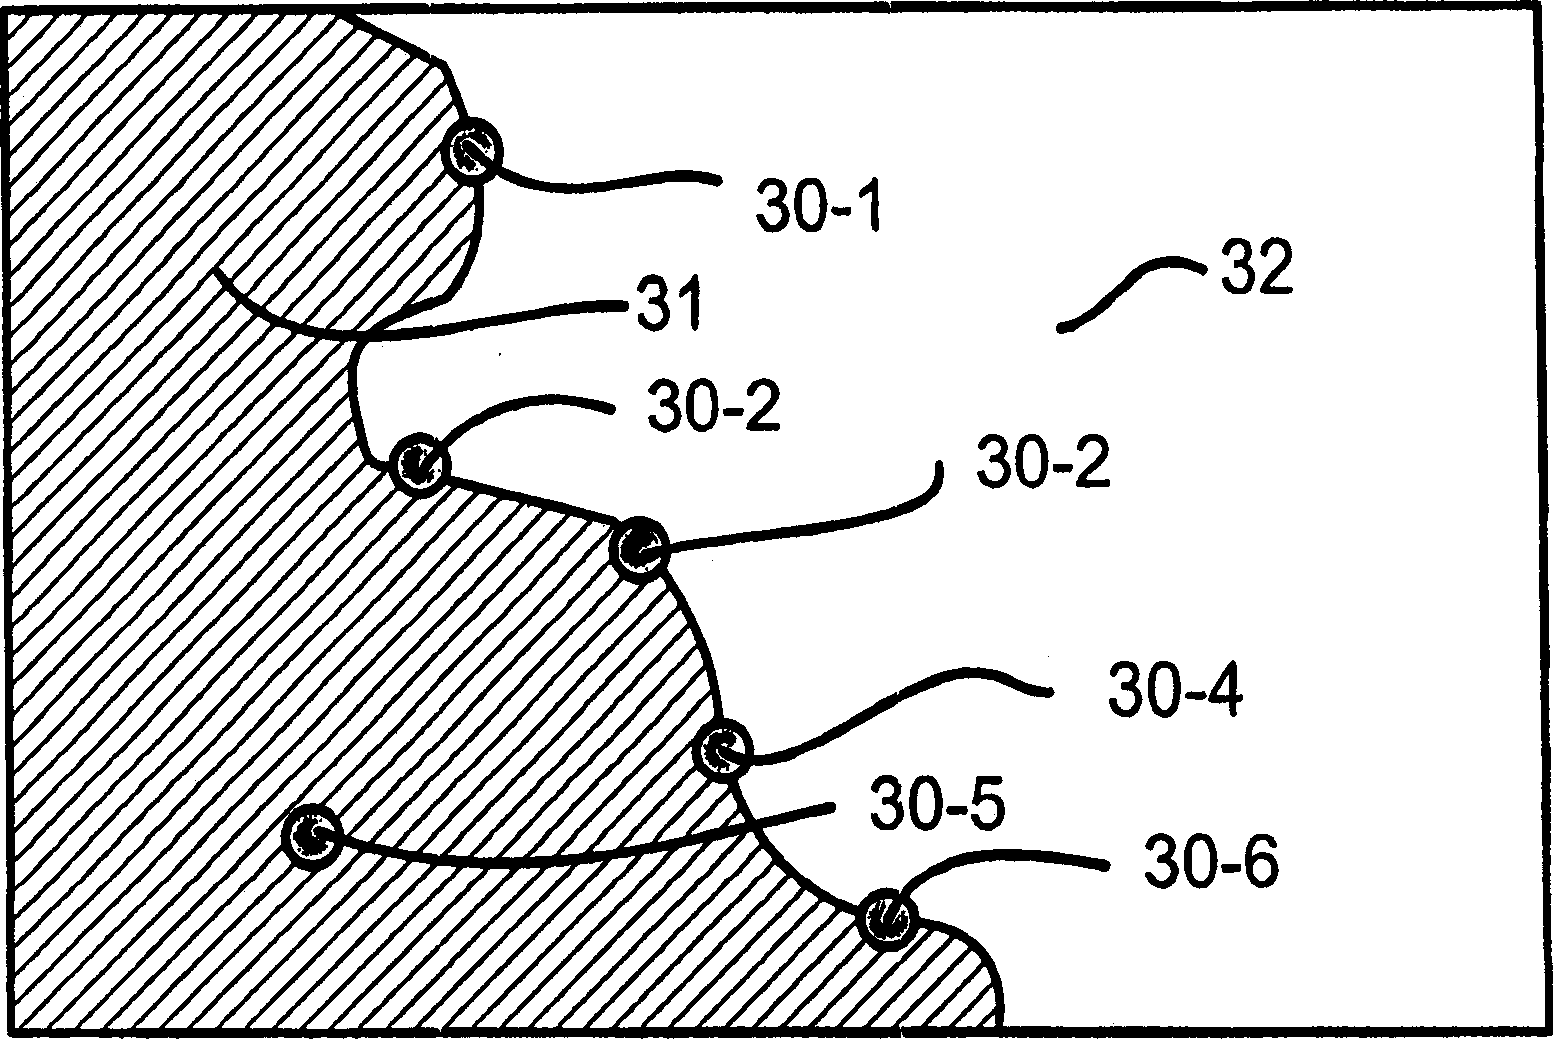 Method of localizing fluorescent markers